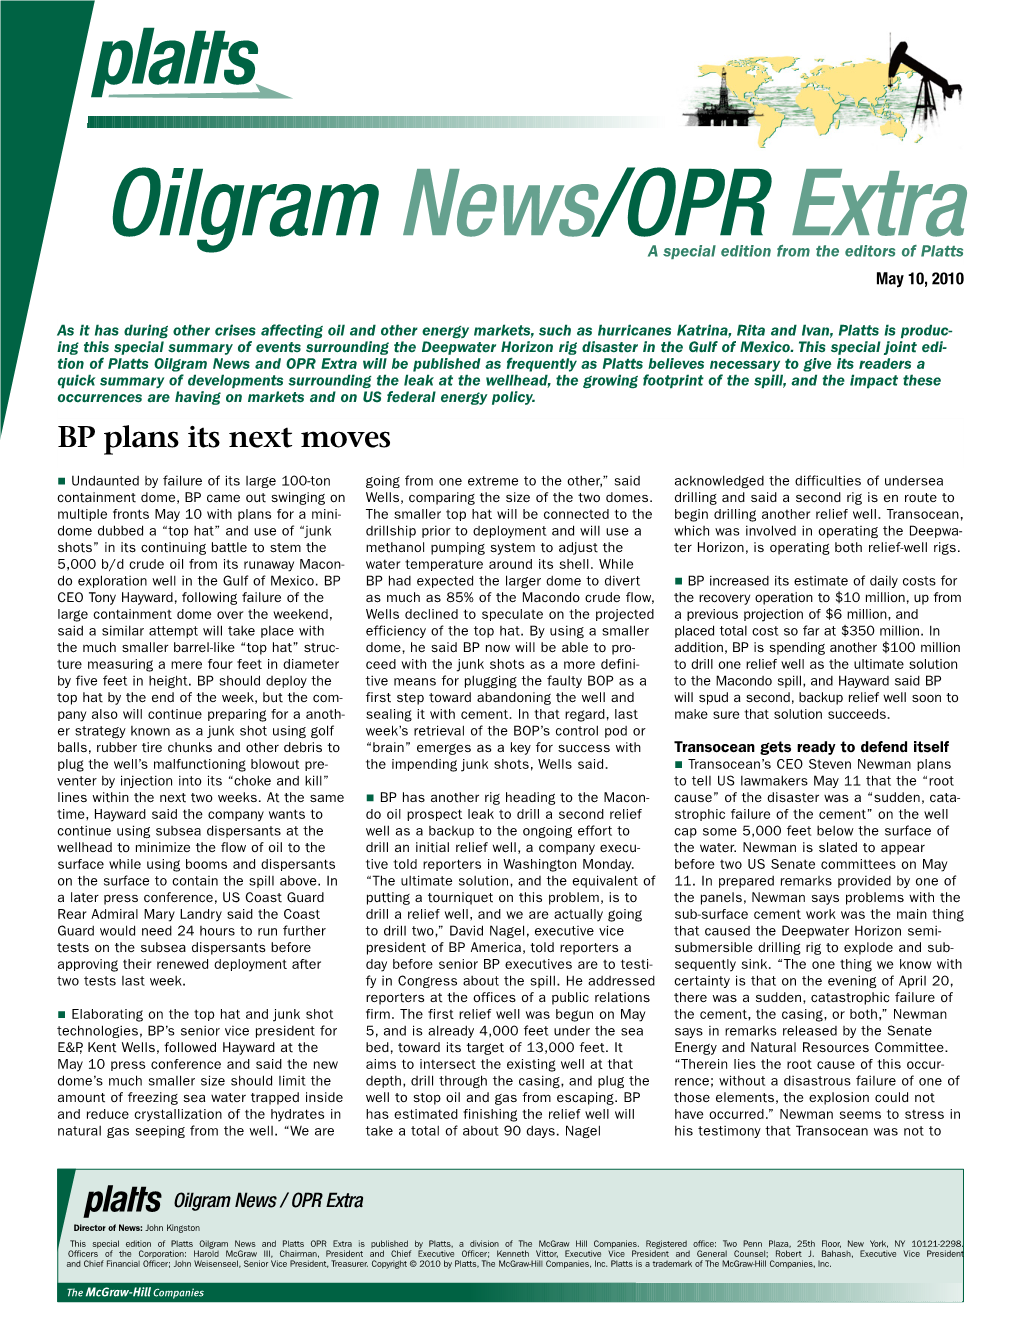 Oilgram News/OPR Extra a Special Edition from the Editors of Platts May 10, 2010